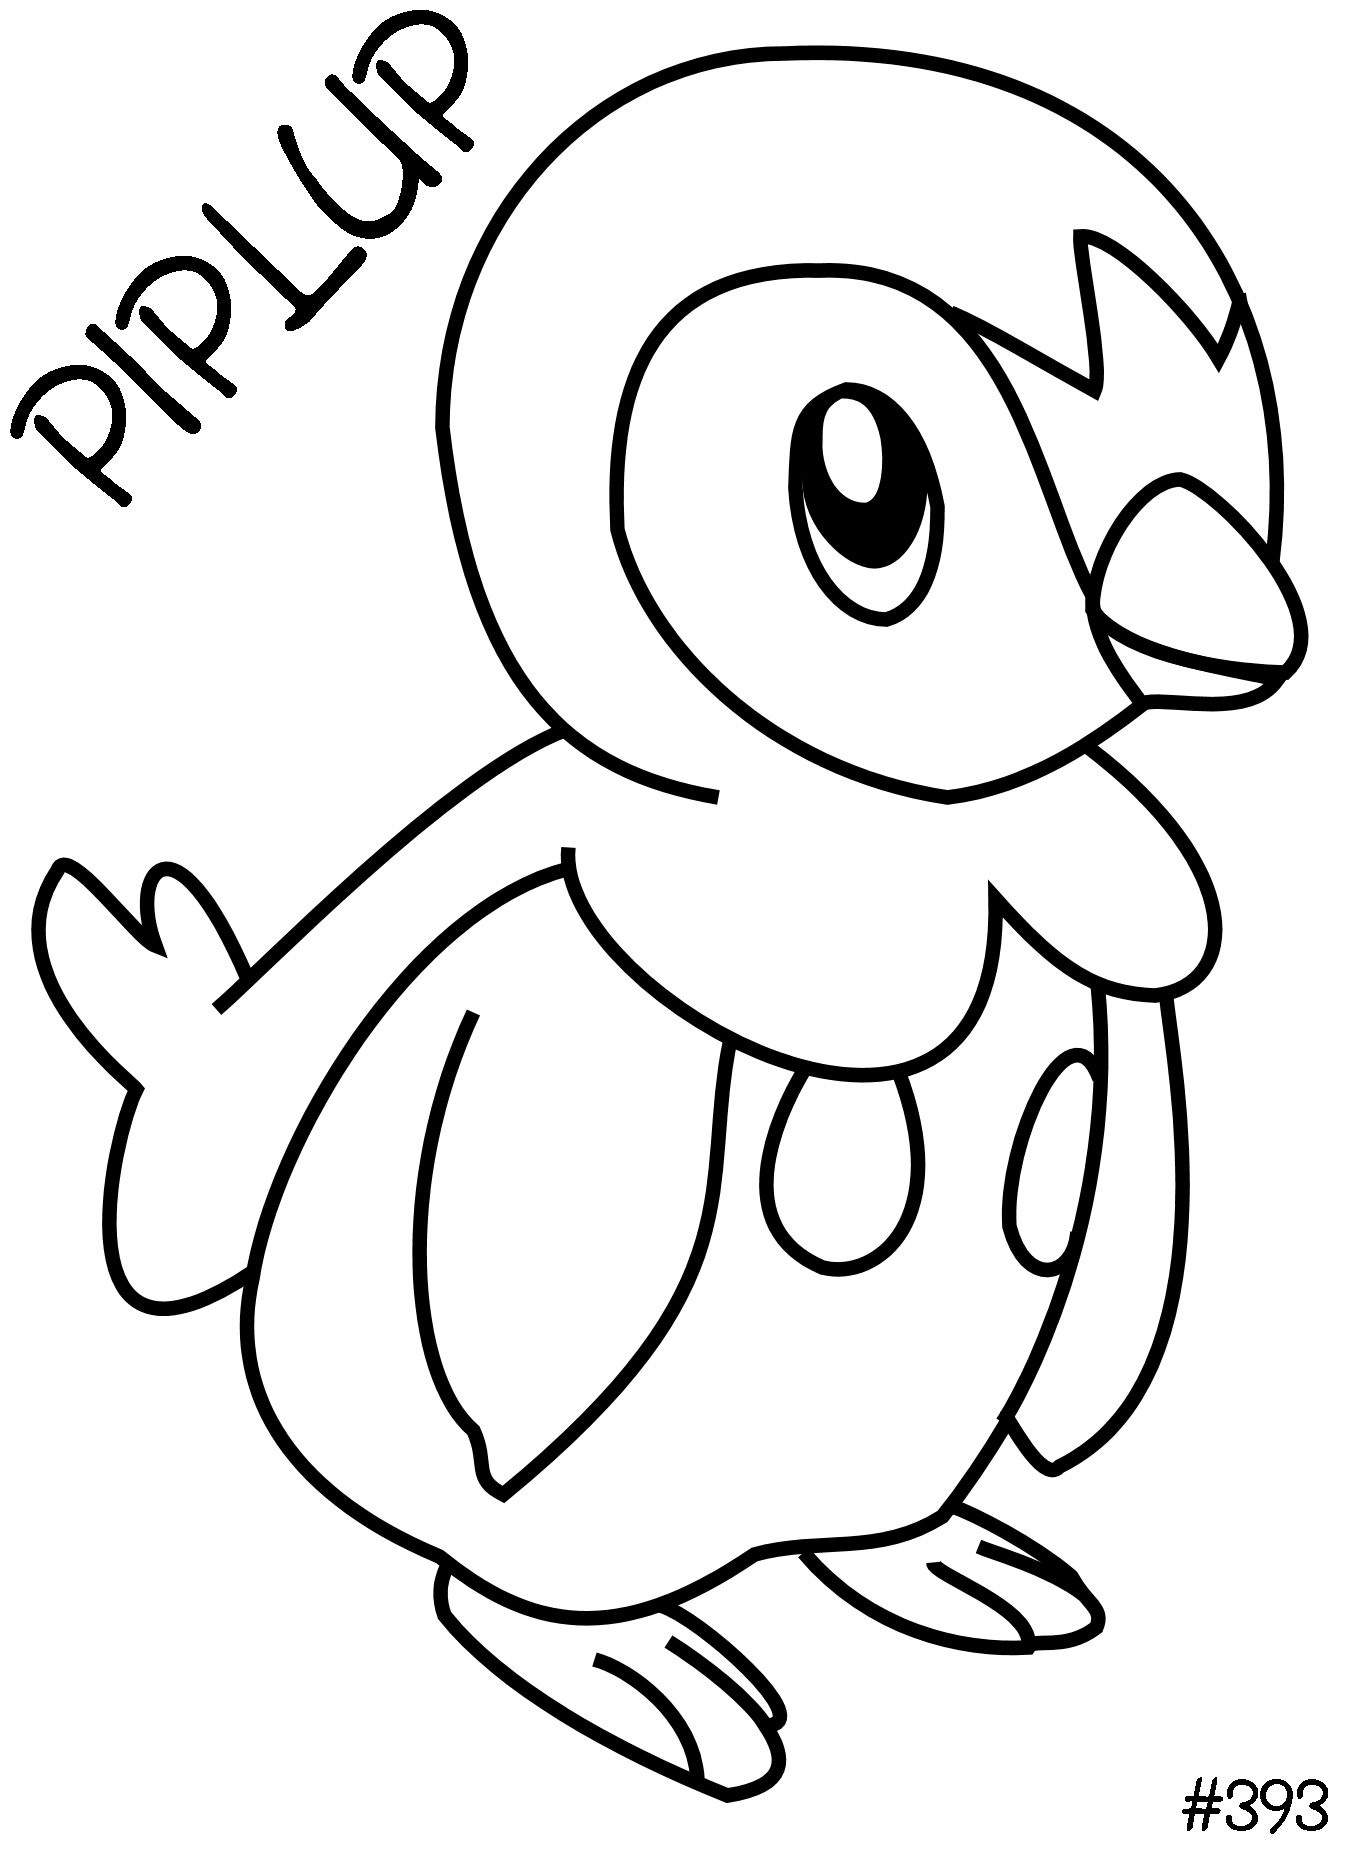 Pokemon Piplup Coloring Pages at GetDrawings | Free download